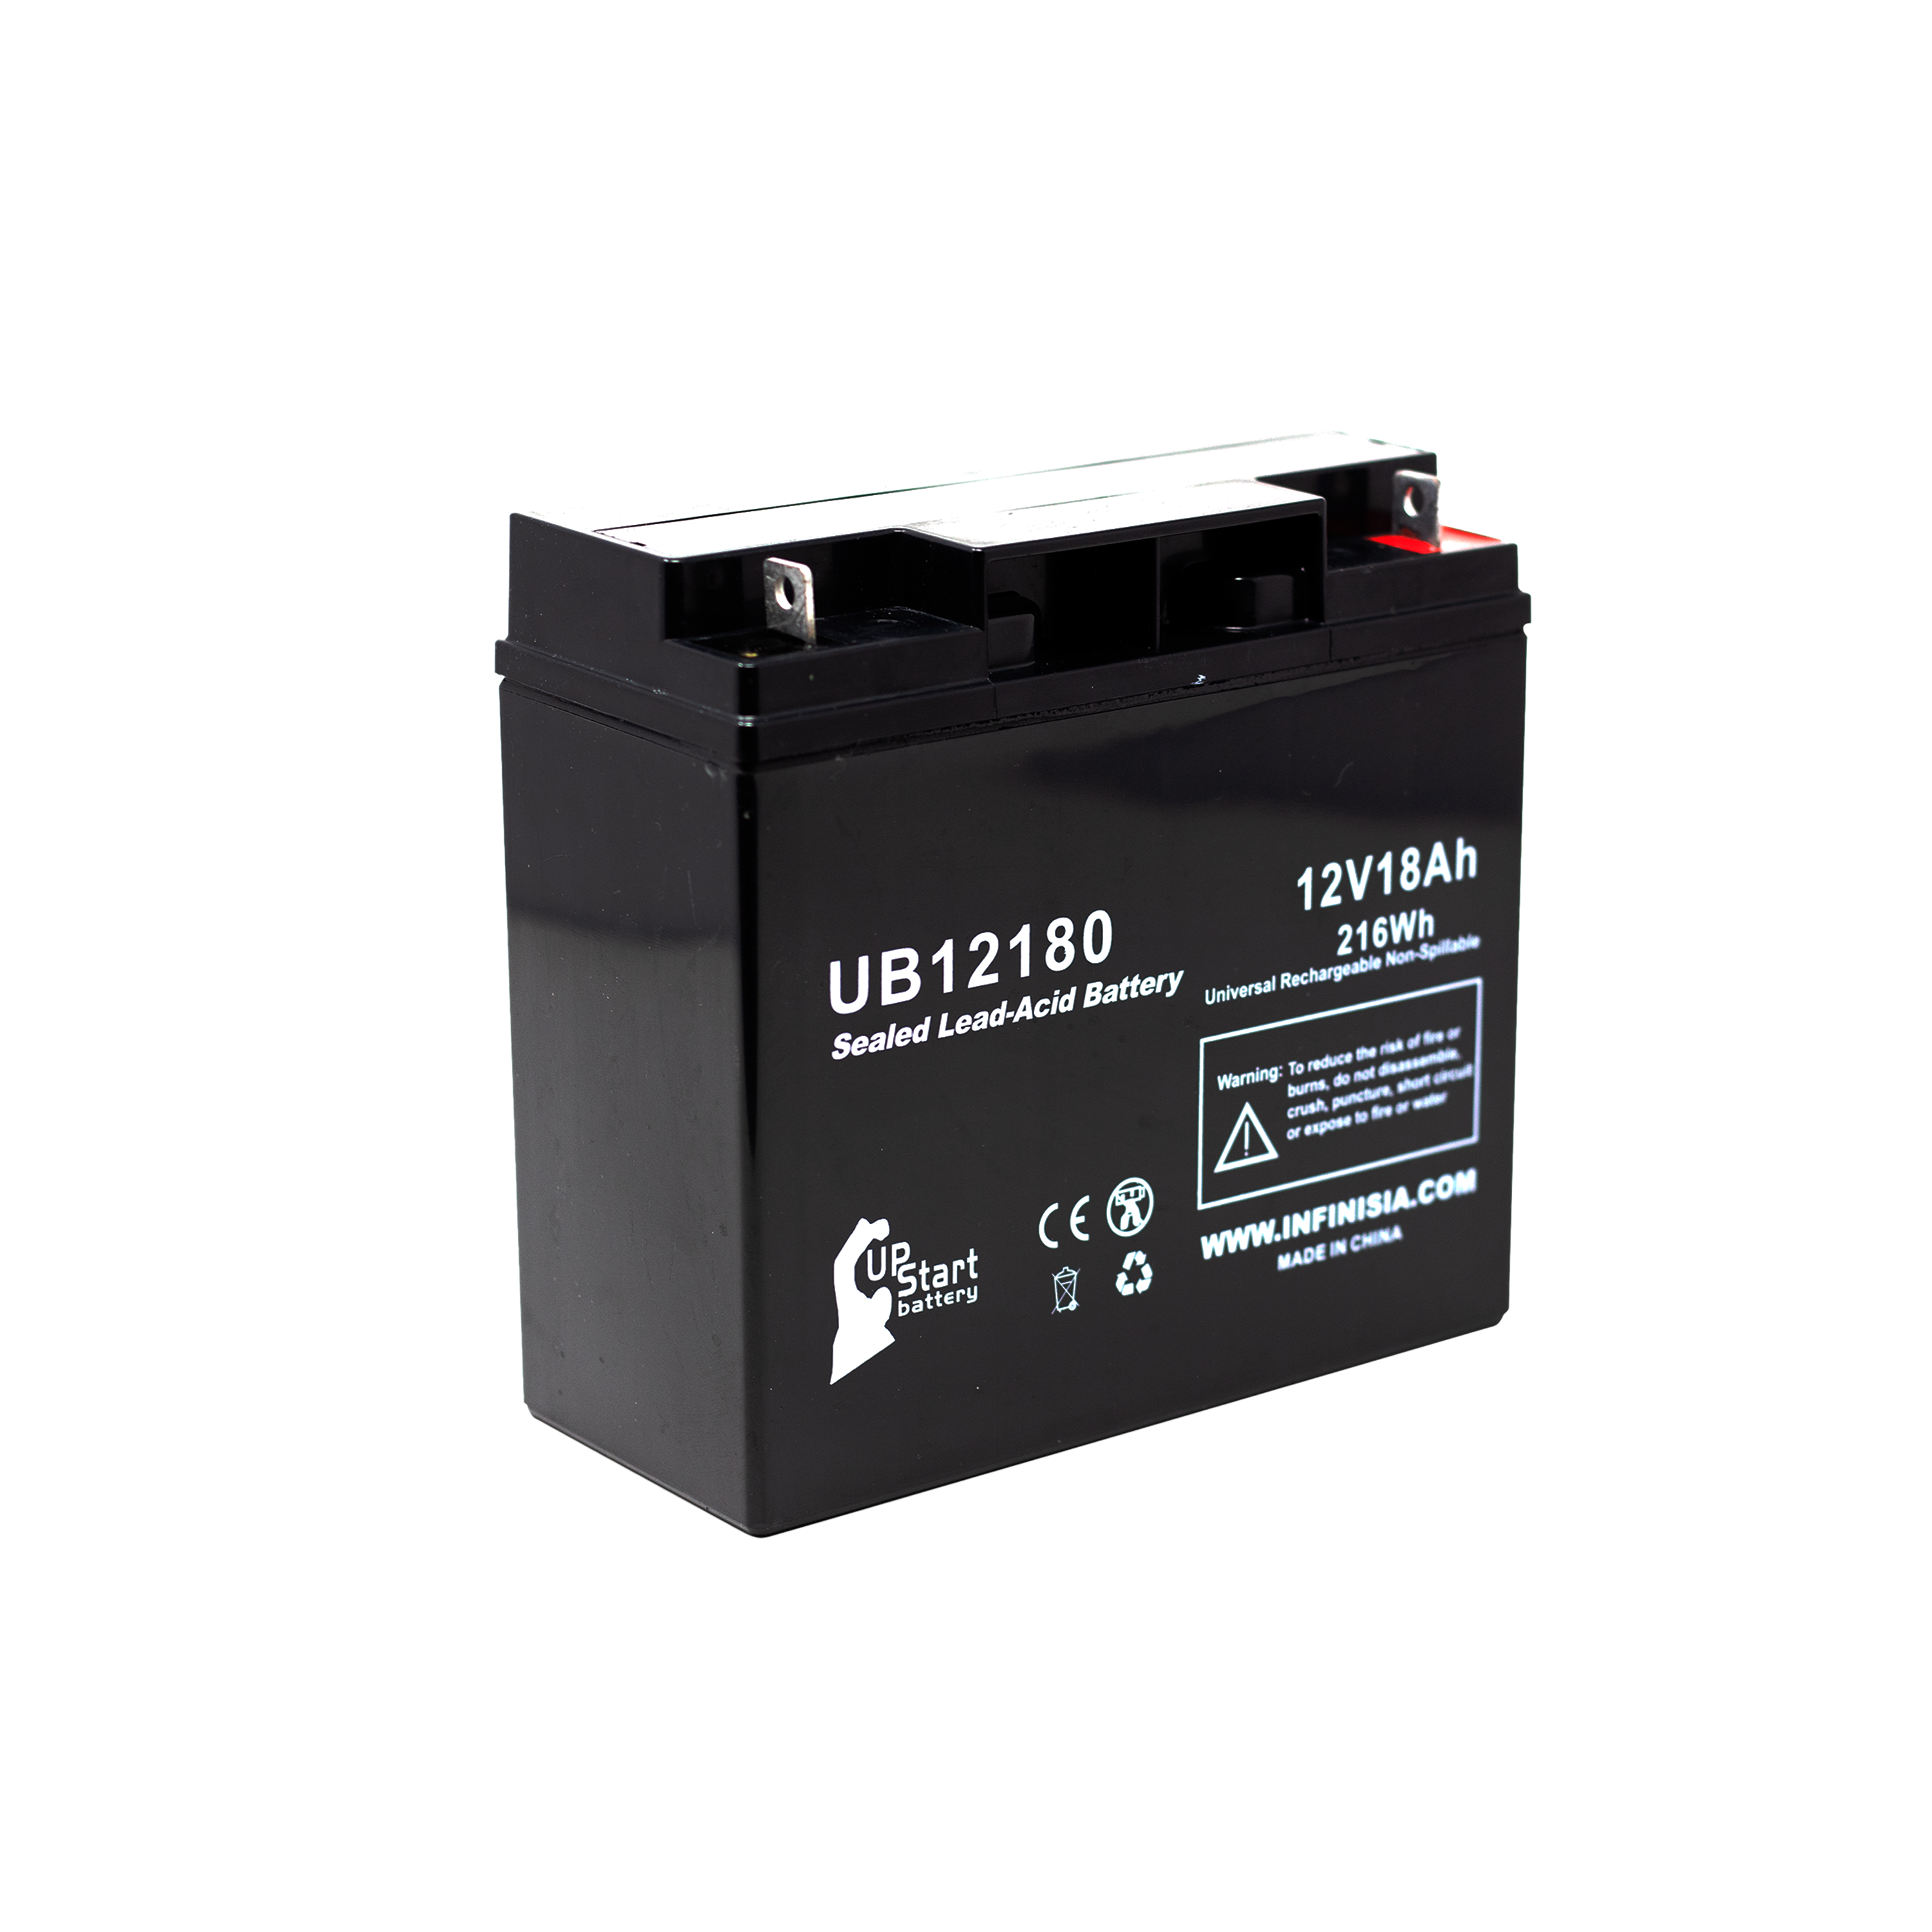 KUNG LONG WP18-12 Battery Replacement - UB12180 Universal Sealed Lead Acid Battery (12V, 18Ah, 18000mAh, T4 Terminal, AGM, SLA) - image 5 of 6